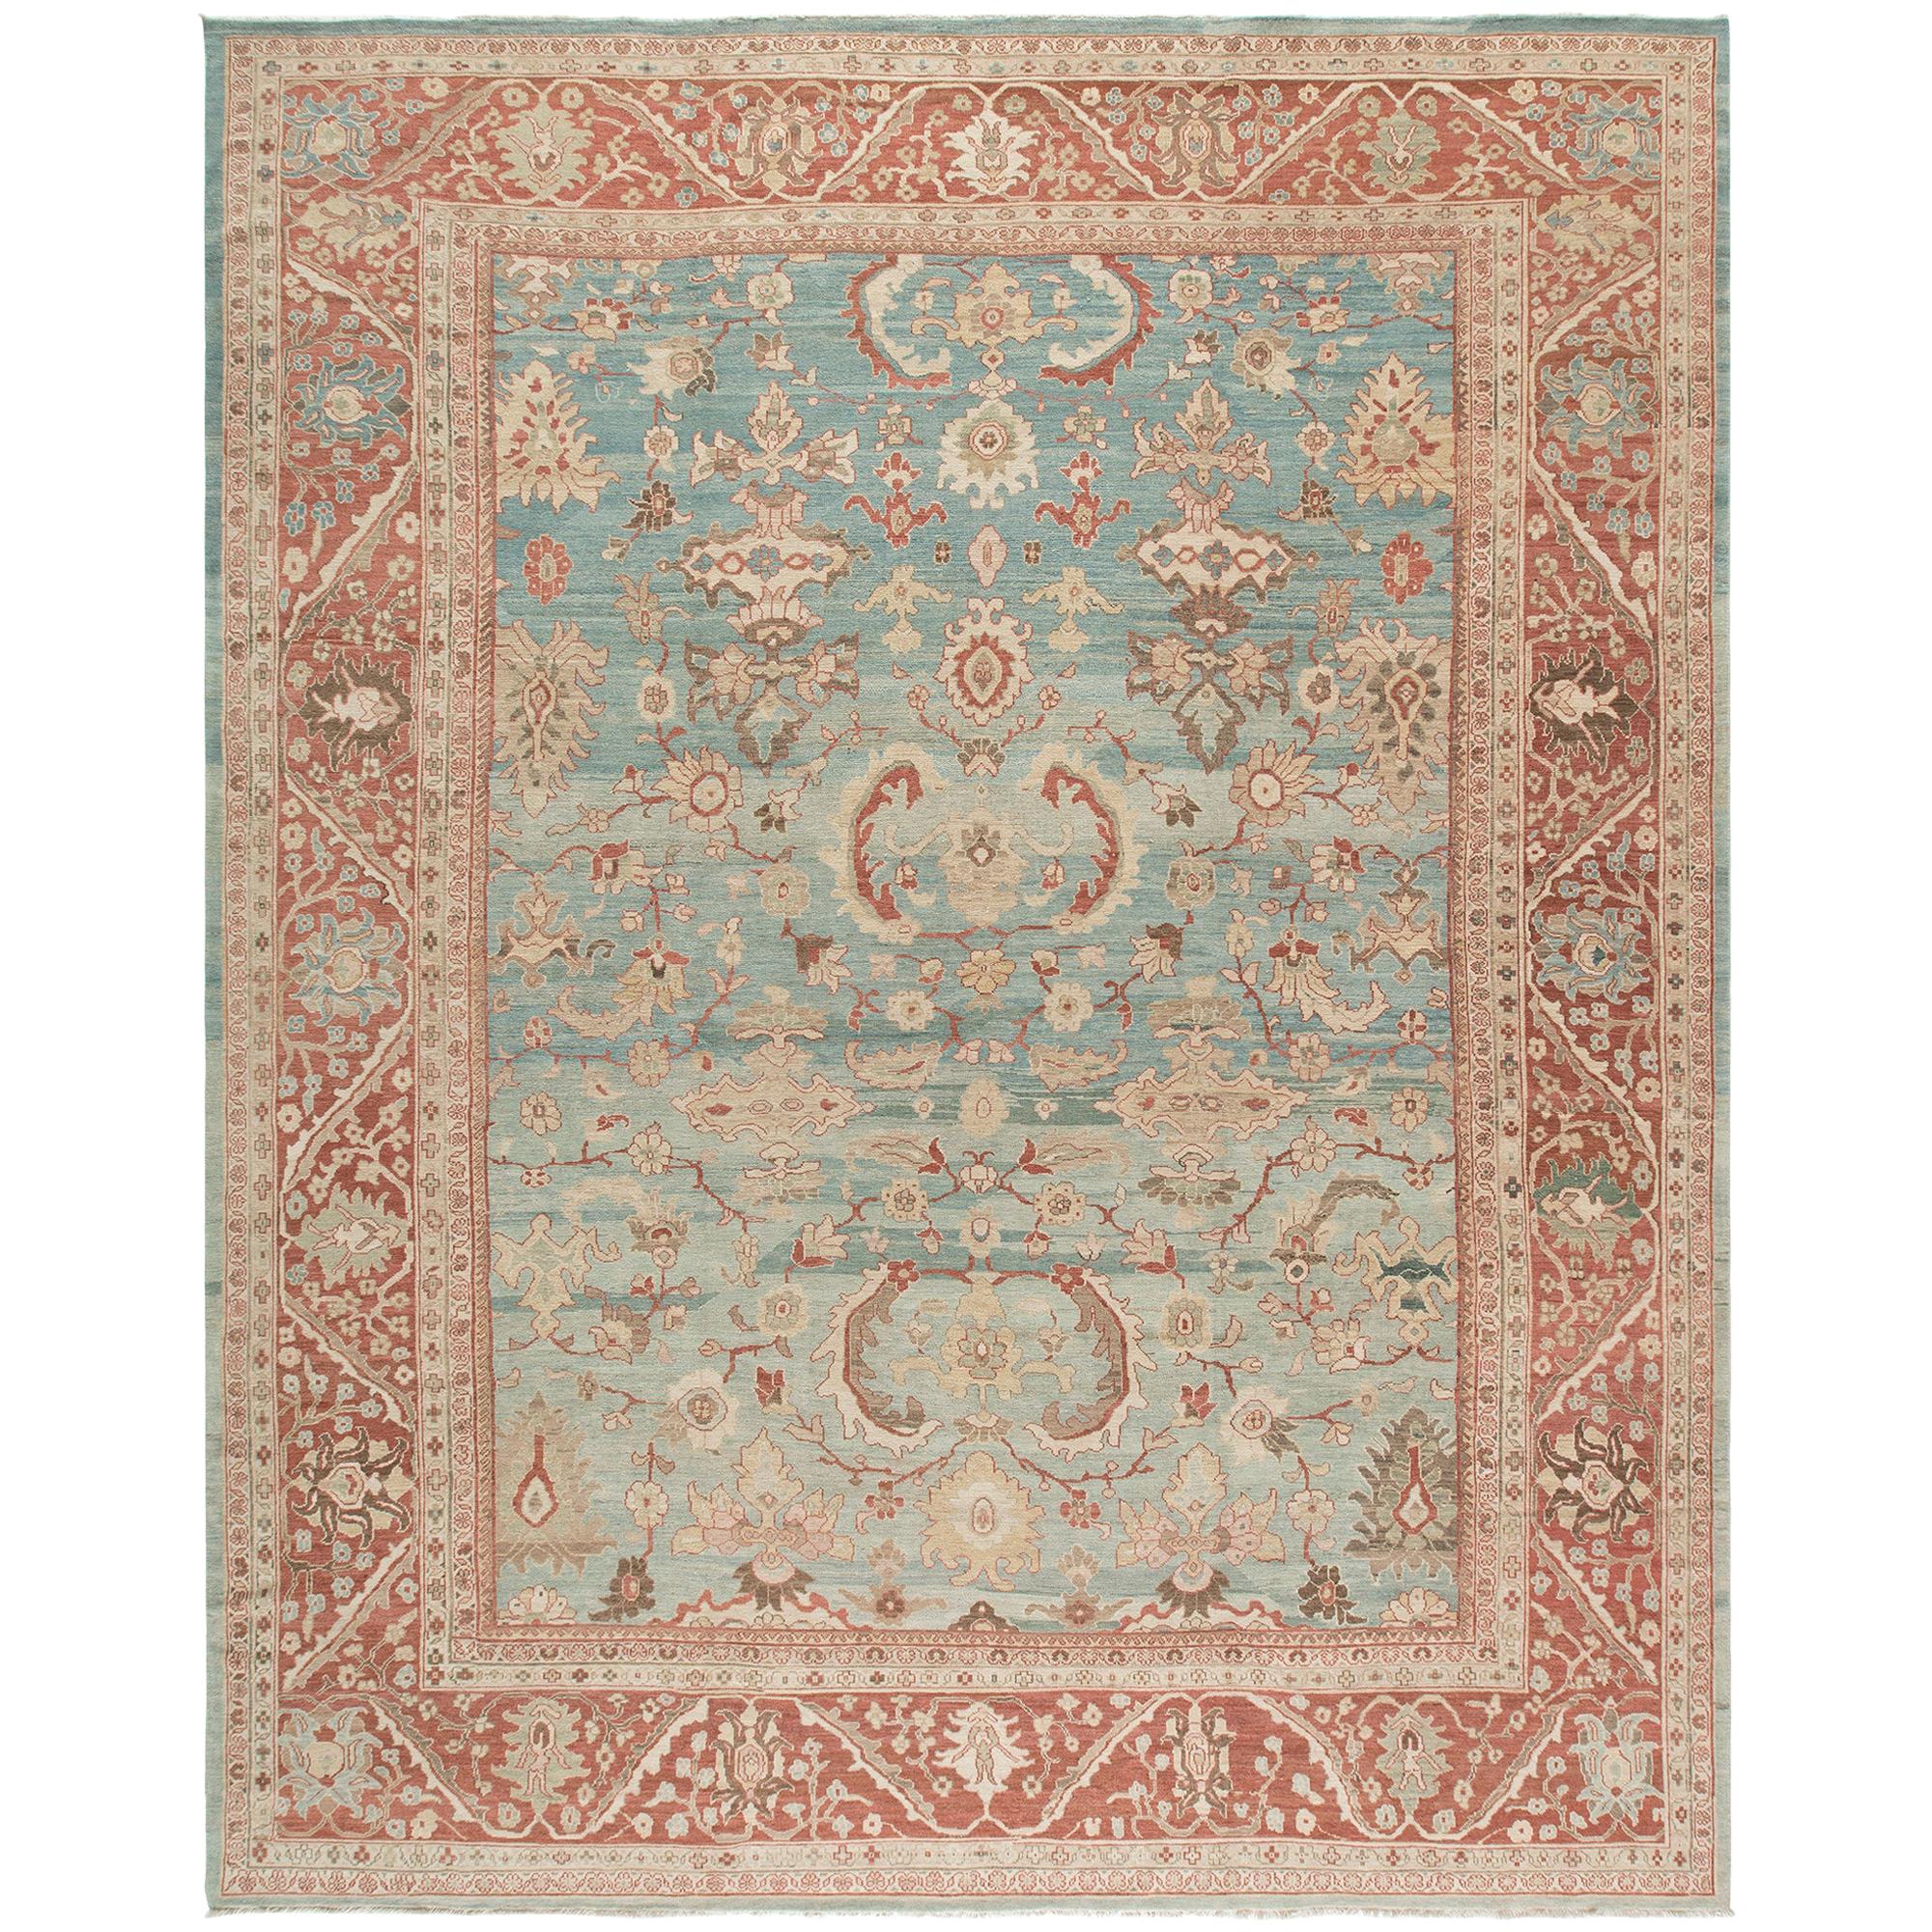 Original Persian Ziegler Sultanabad Hand Knotted Rug in Camel, Blue and Red For Sale